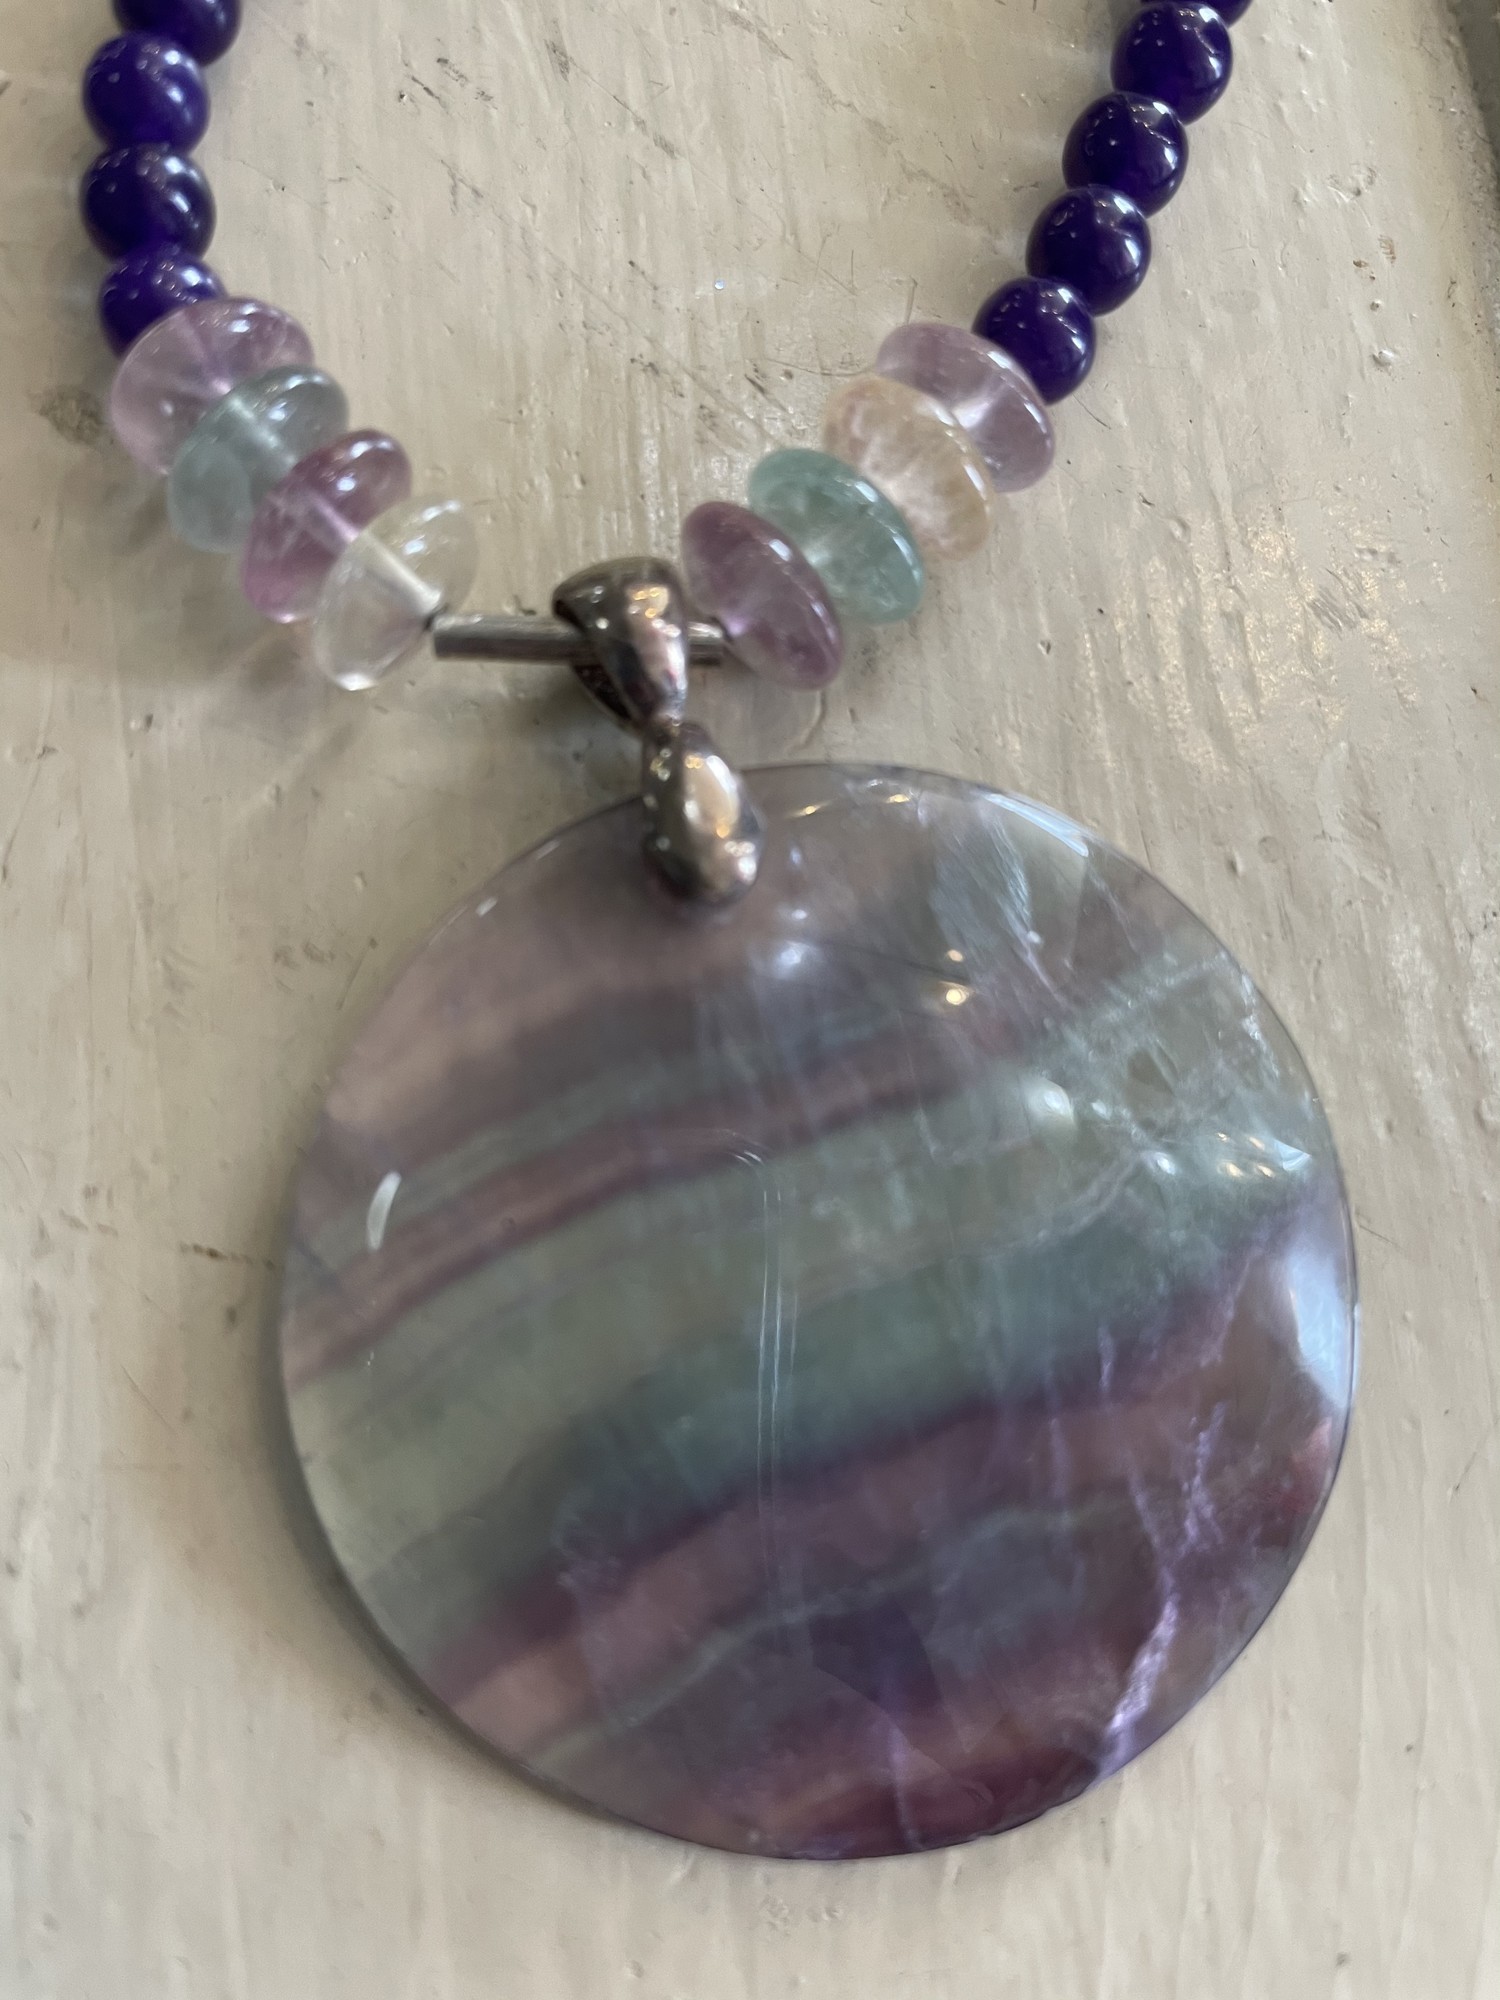 Rainbow Florite & Amythest Necklace
Beautifully hand crafted with sterling silver clasp, dividers and gem anchor
Purple, green and cream
Size: 11 Inches